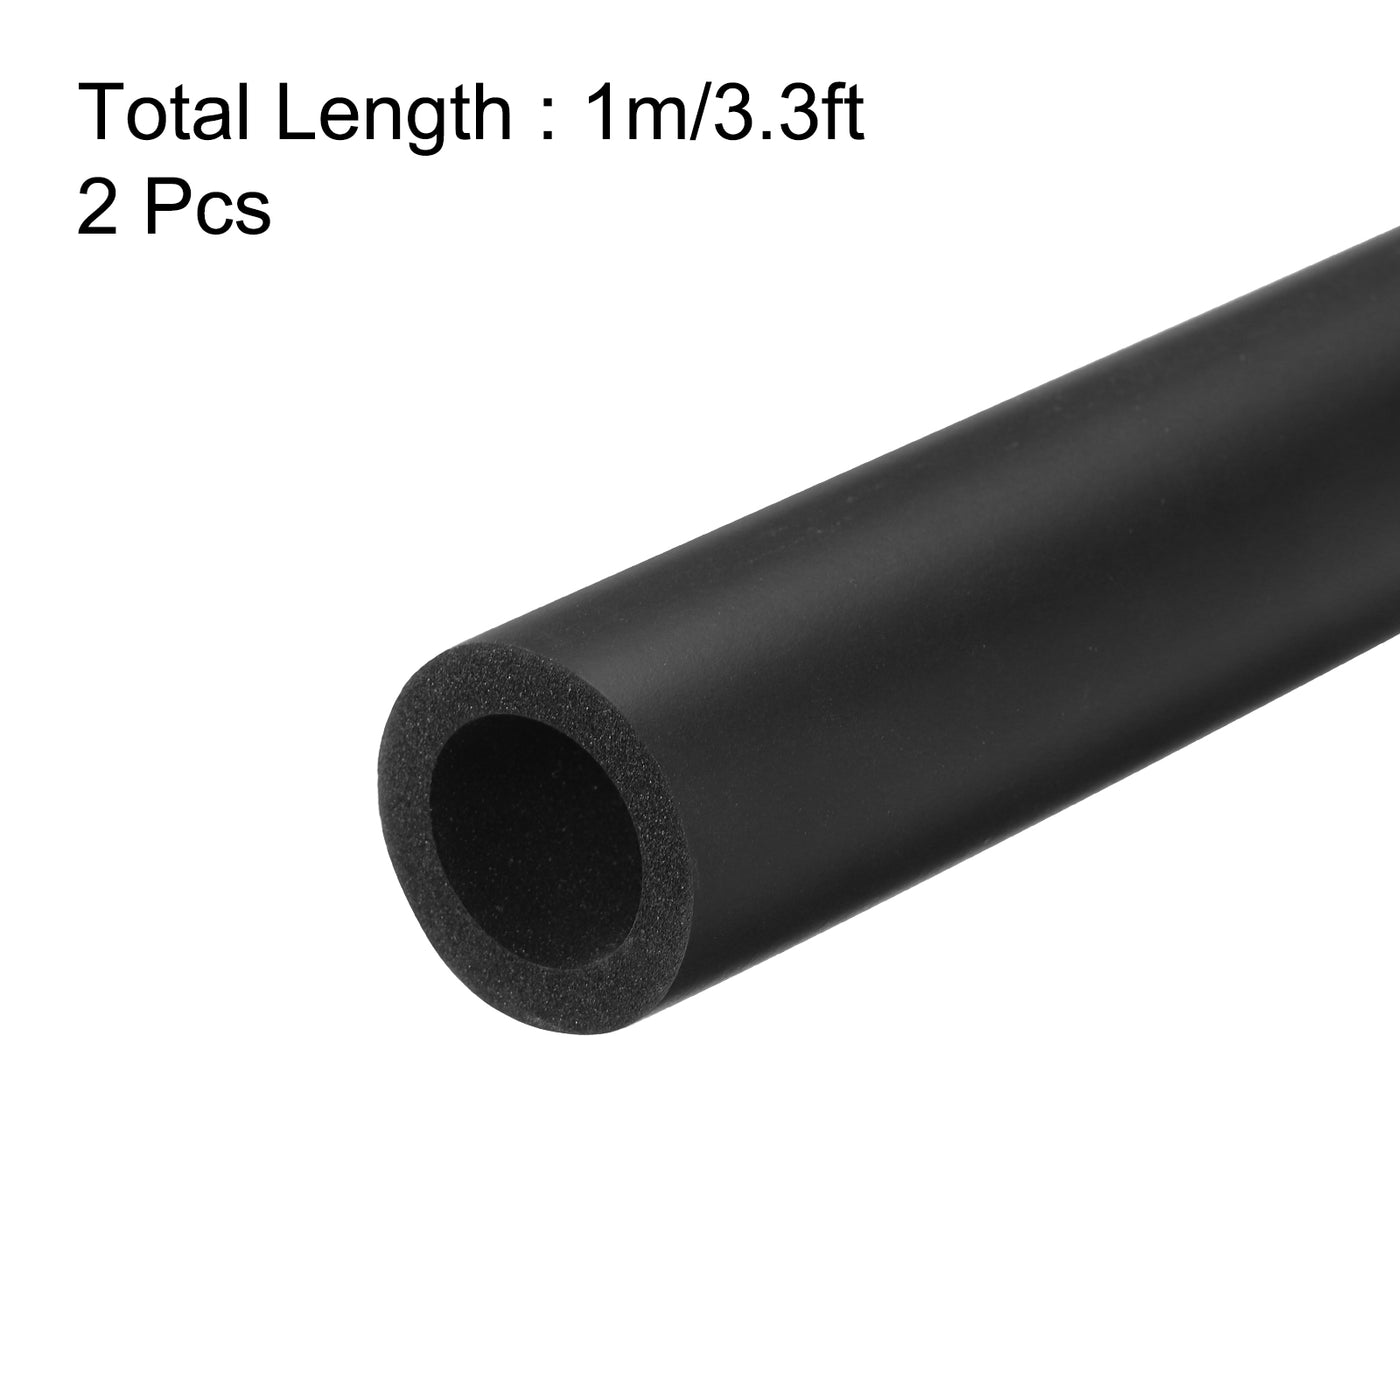 uxcell Uxcell 2pcs 3.3ft Pipe Insulation Tube 20mm ID 30mm OD Foam Tubing for Handle Grip Support, Black